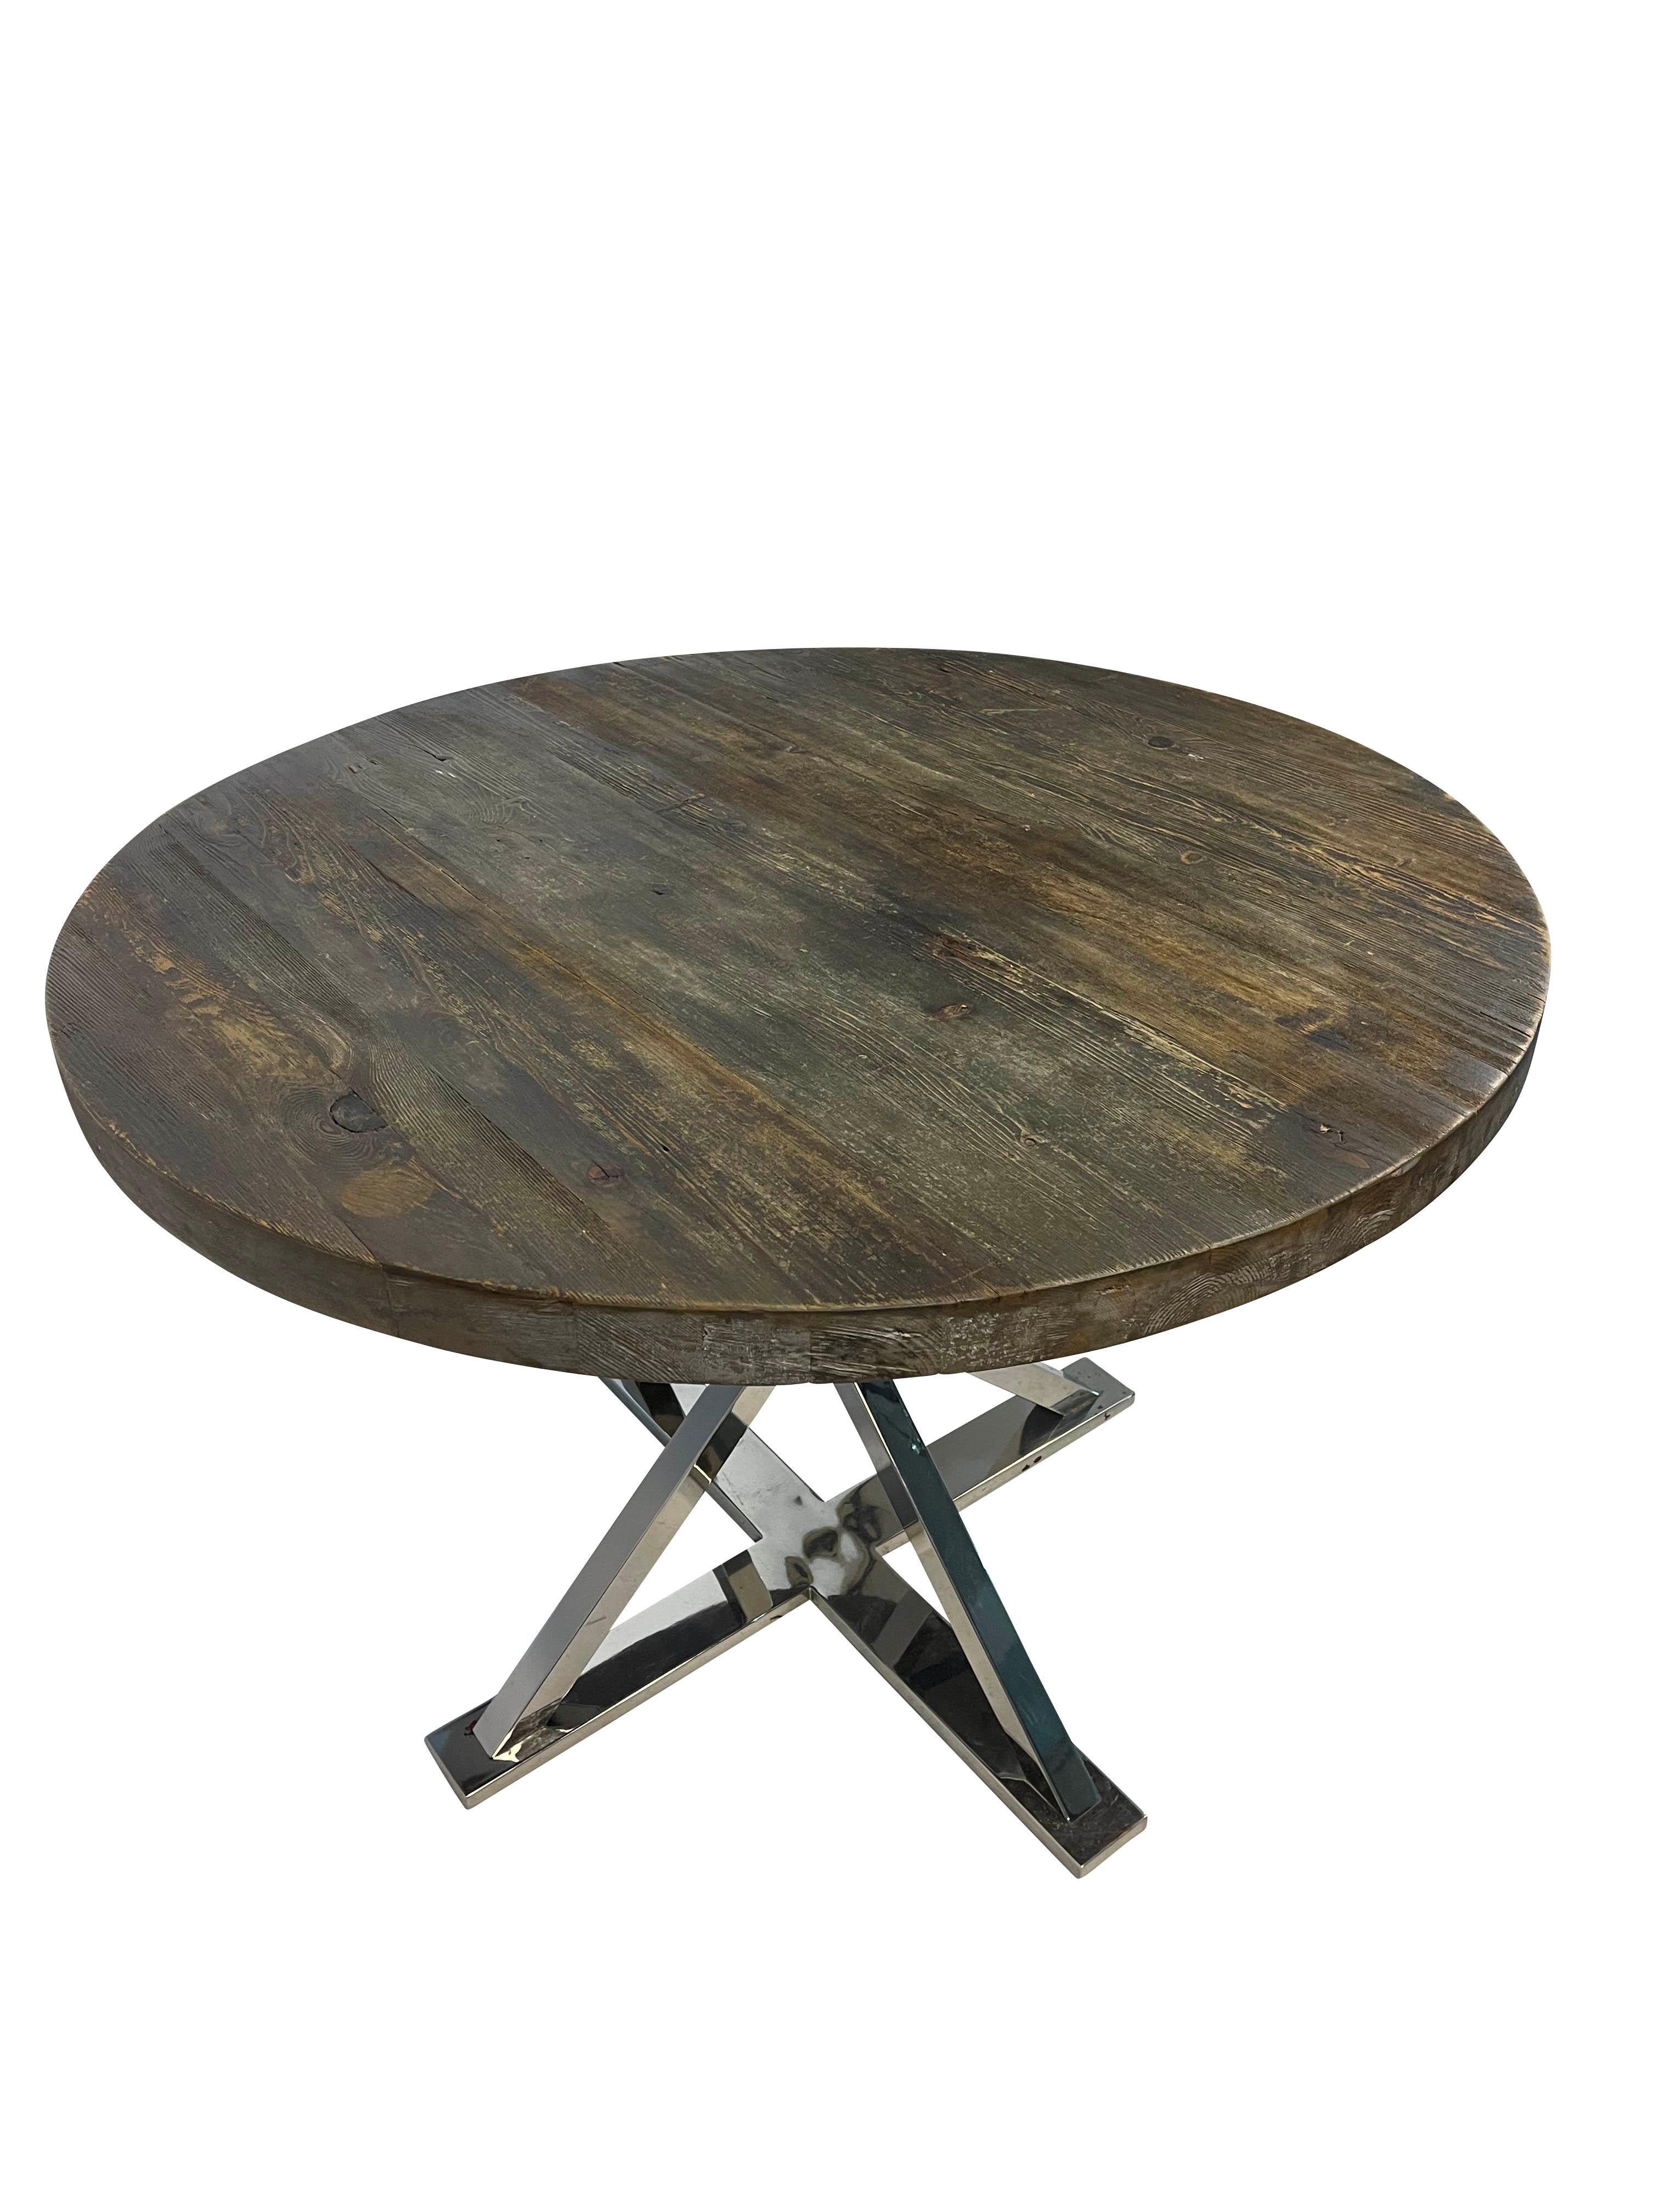 Hand-Crafted  Rustic Wood Top   Round Dining Table with Modern Chrome Base  For Sale